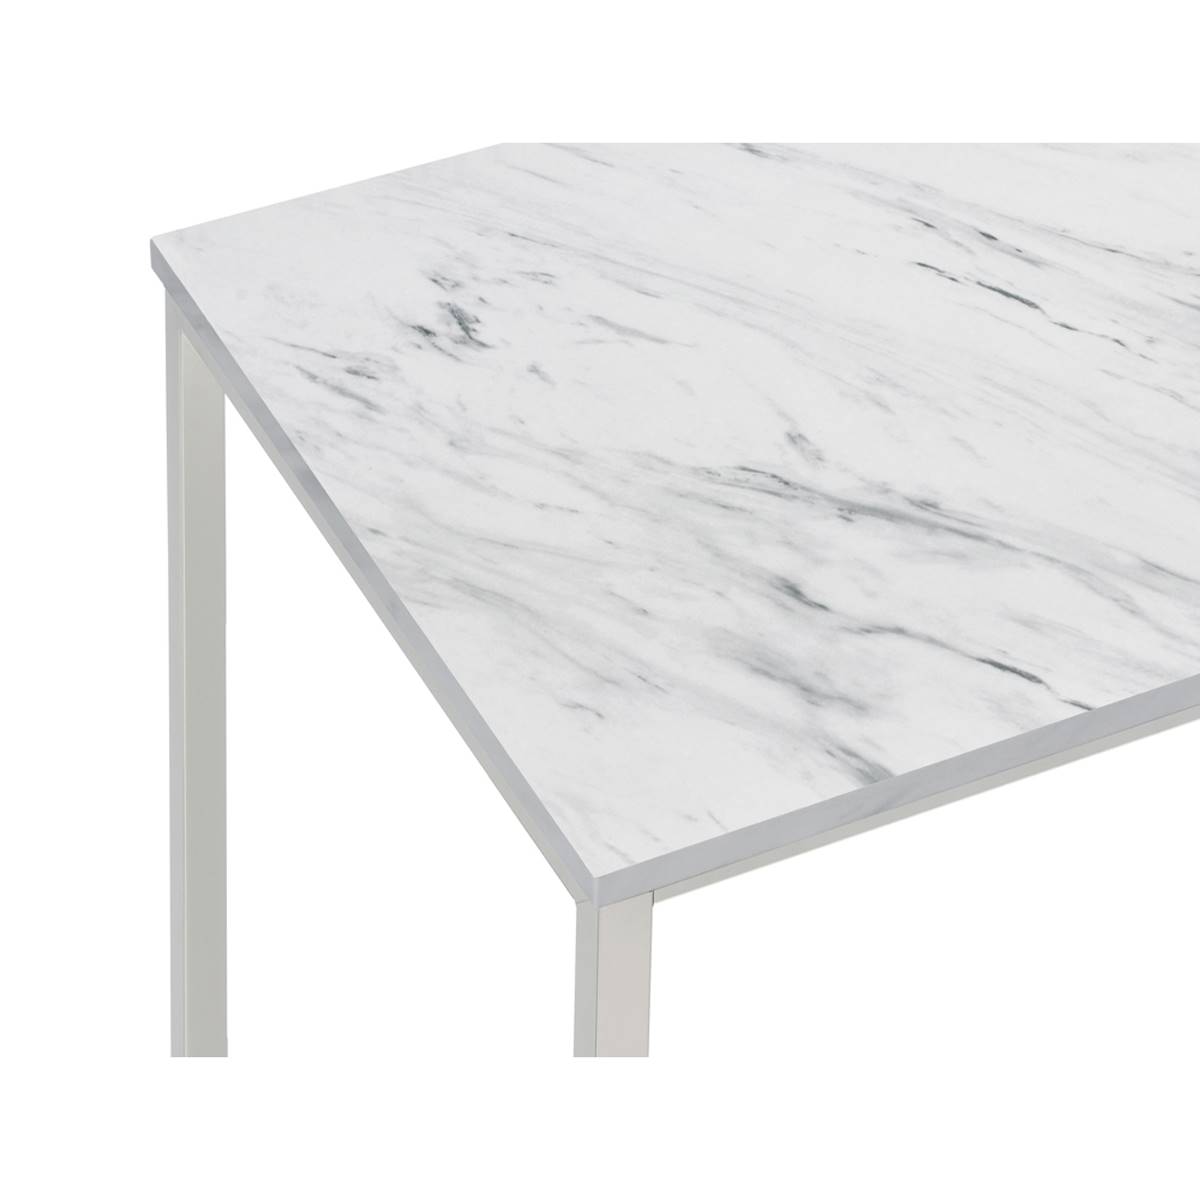 Coaster Coffee Table With Casters - White & Satin Nickel